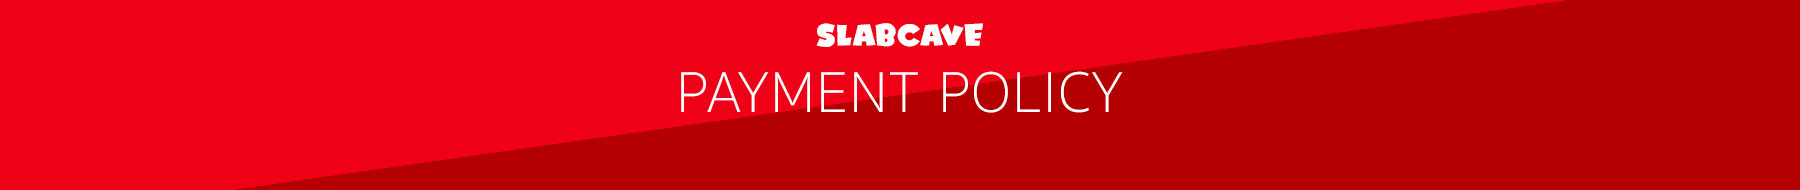 SlabCave Privacy Policy Banner